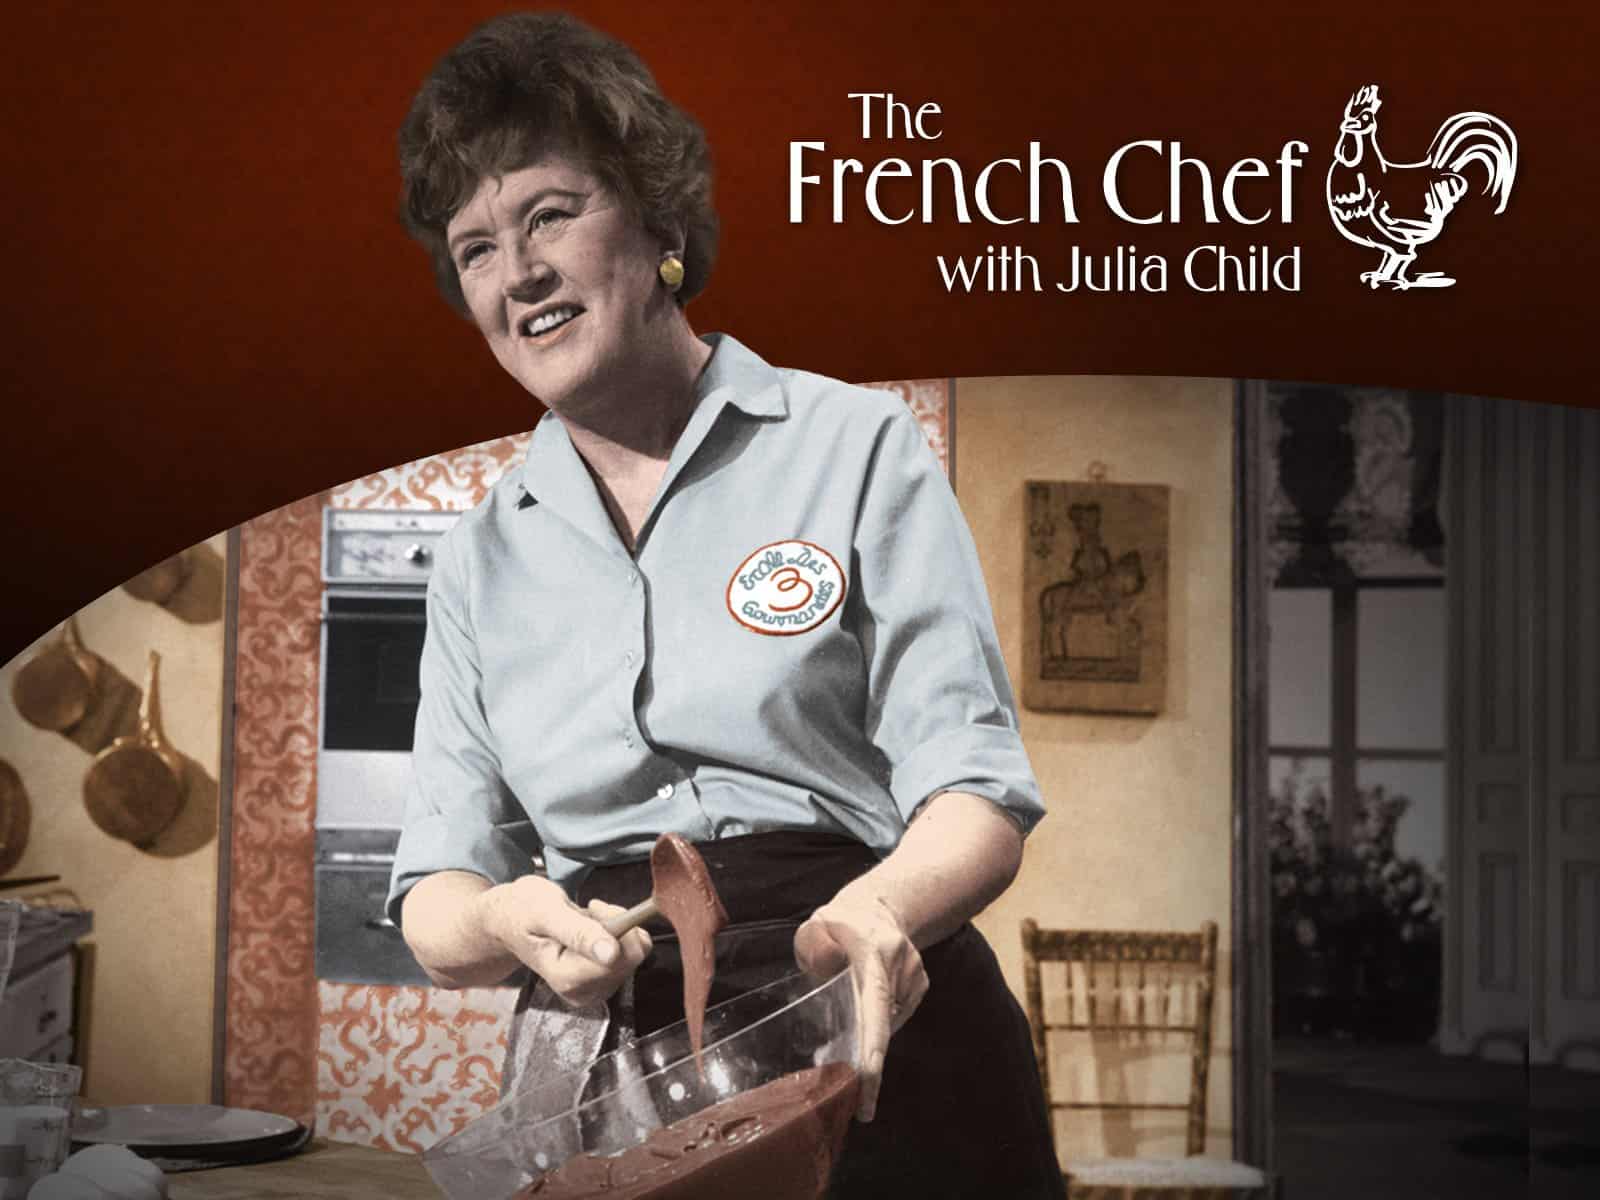 The French Chef with Julia Child